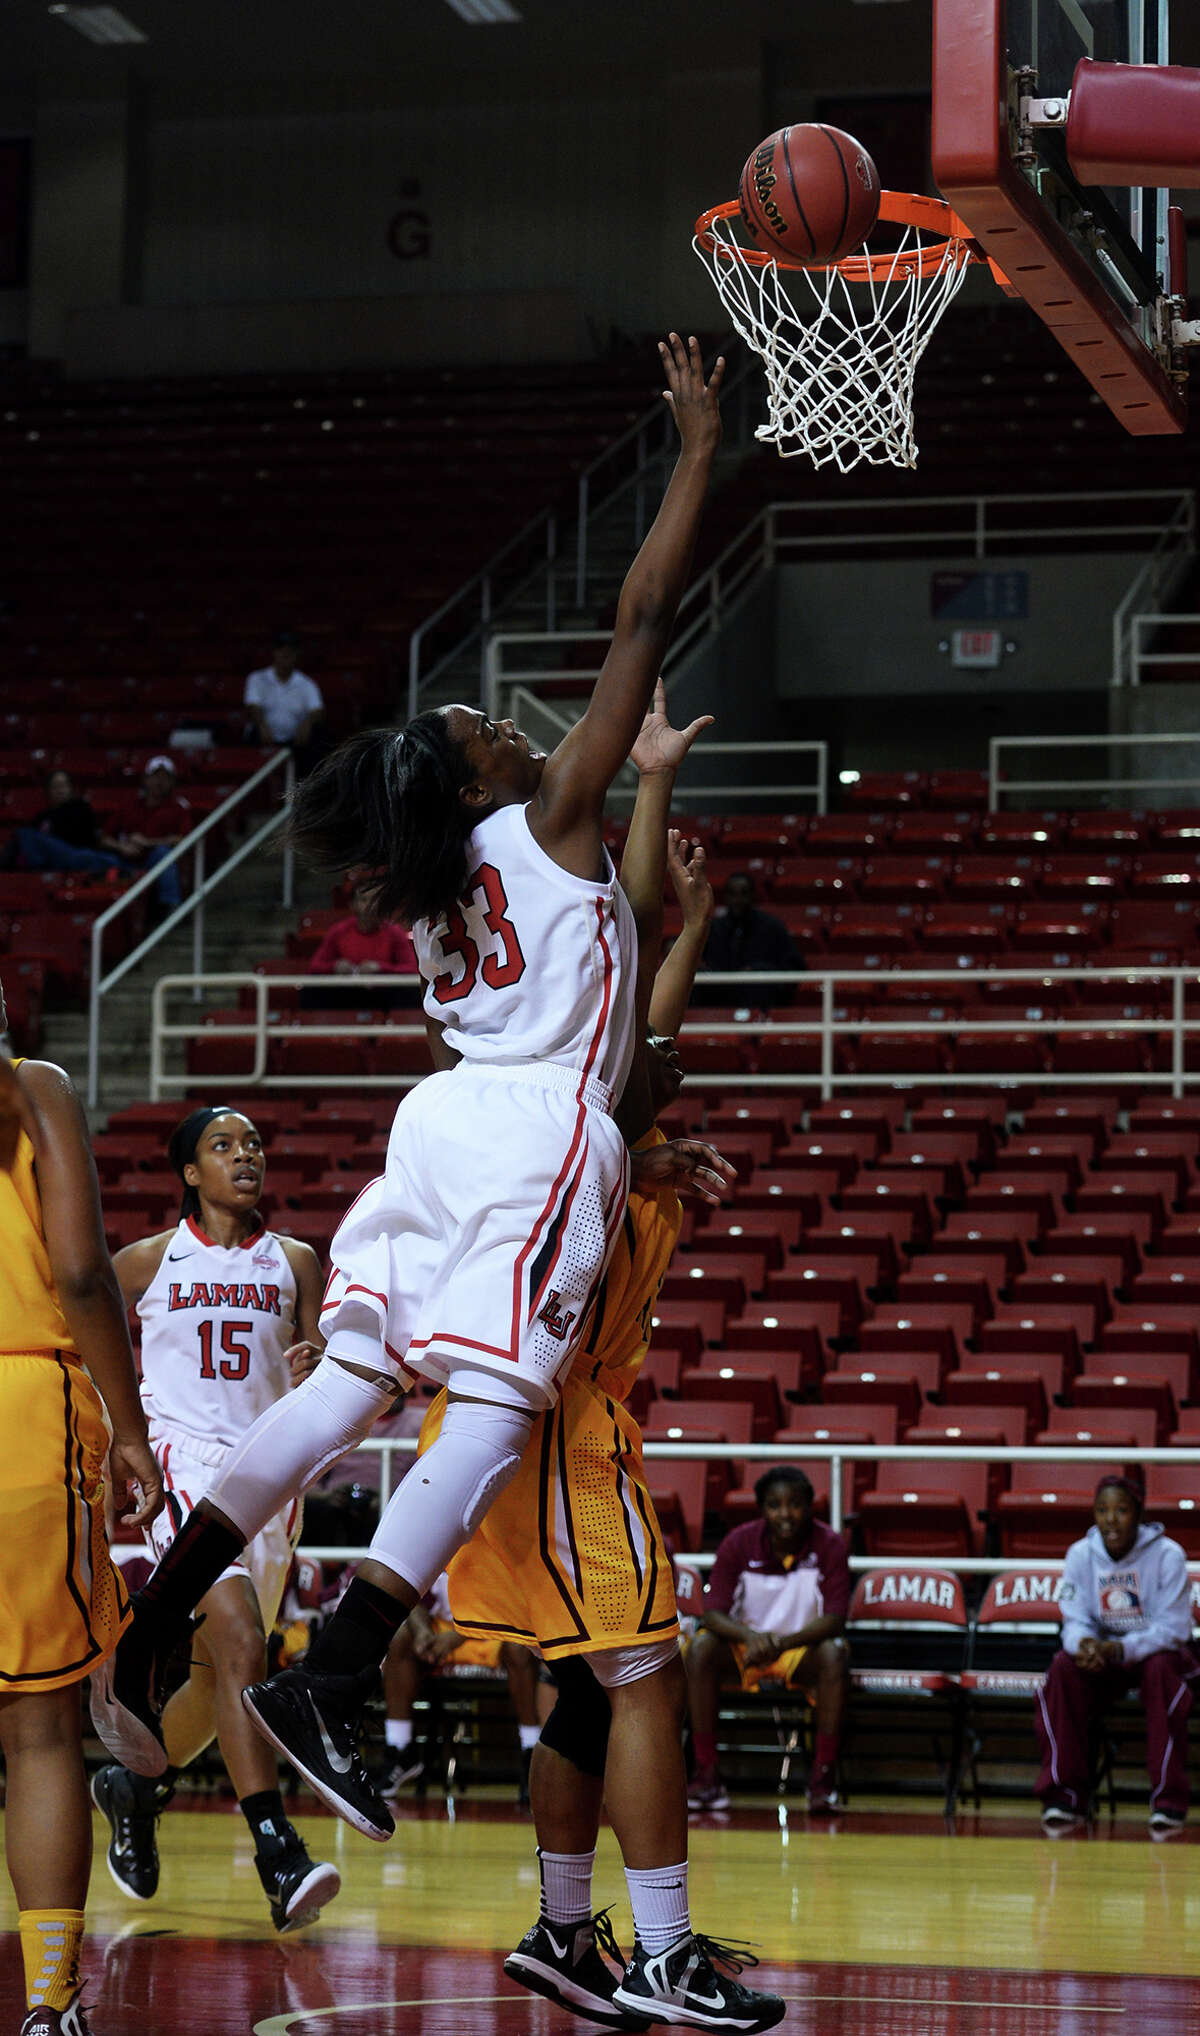 Lamar's Kiandra Bowers, No. 33, jumps for a shot against Huston-Tillotson on Tuesday. The Lamar Lady Cardinals hosted Huston-Tillotson Lady Rams at the Montagne Center on Tuesday night. Photo taken Tuesday 12/2/14 Jake Daniels/The Enterprise